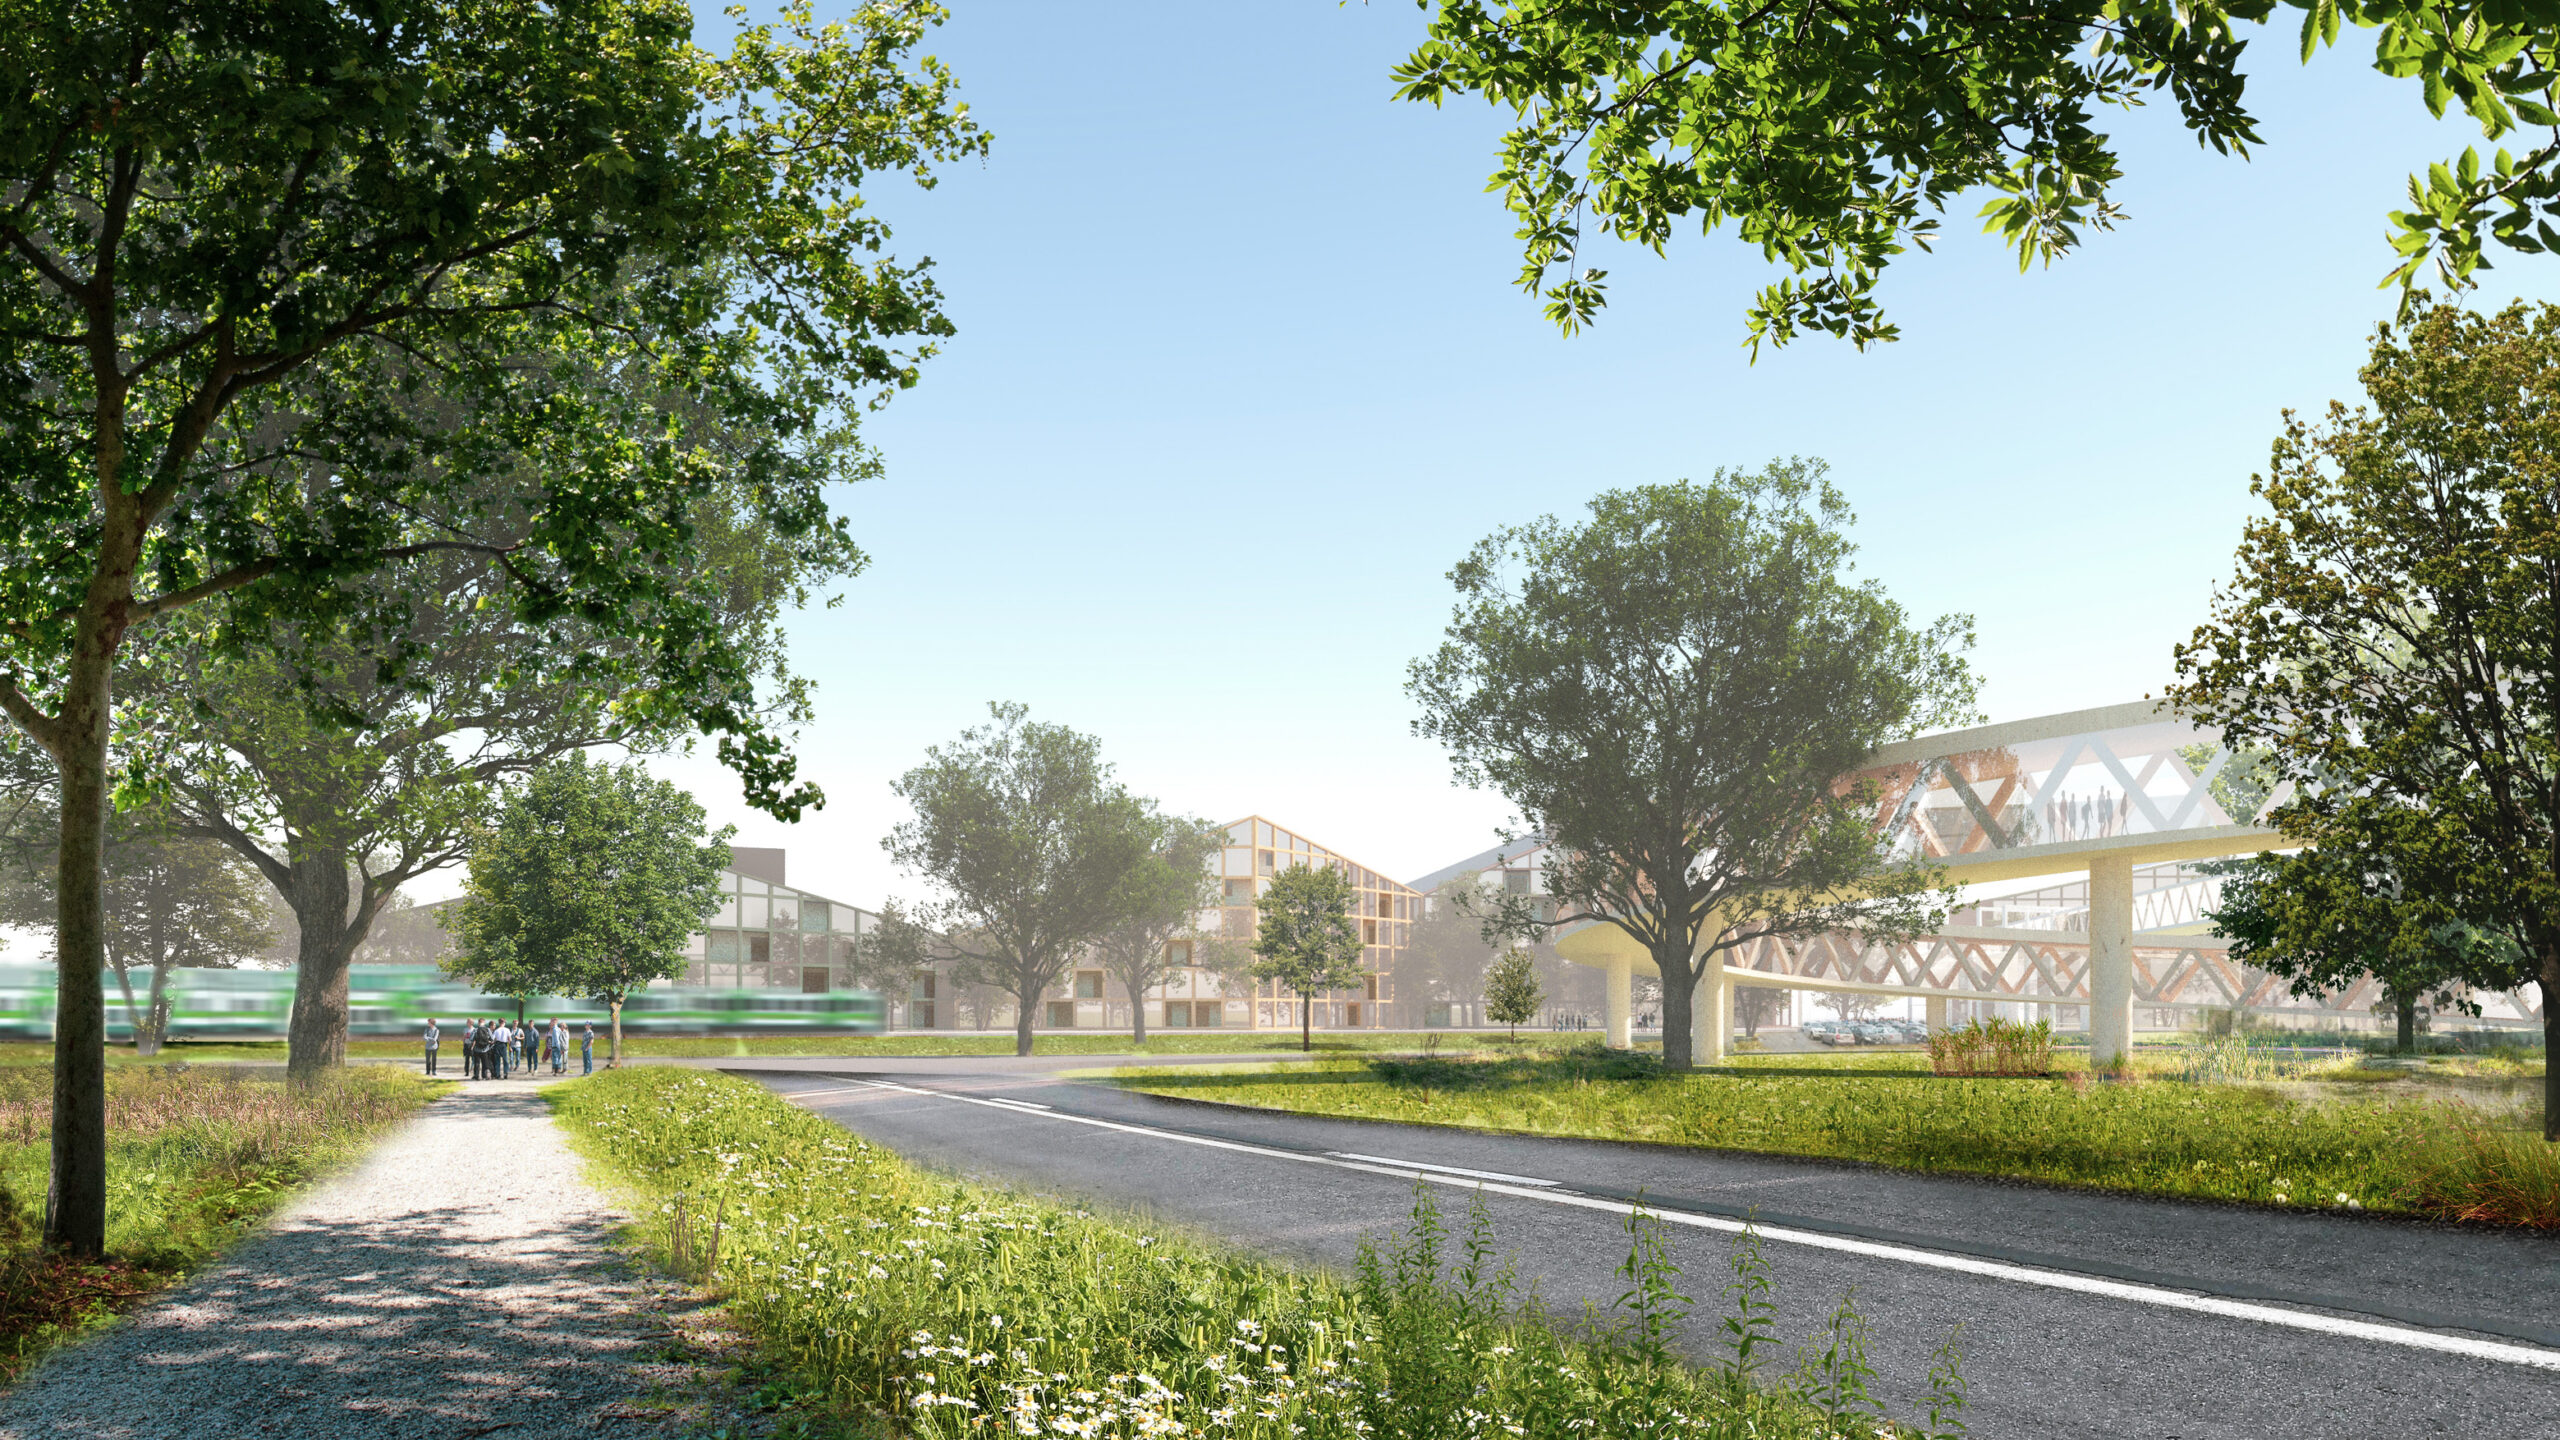 Perspective view of the new overpass that connects the different parts of Ylöjärvi into a continuous network of access to greenery 